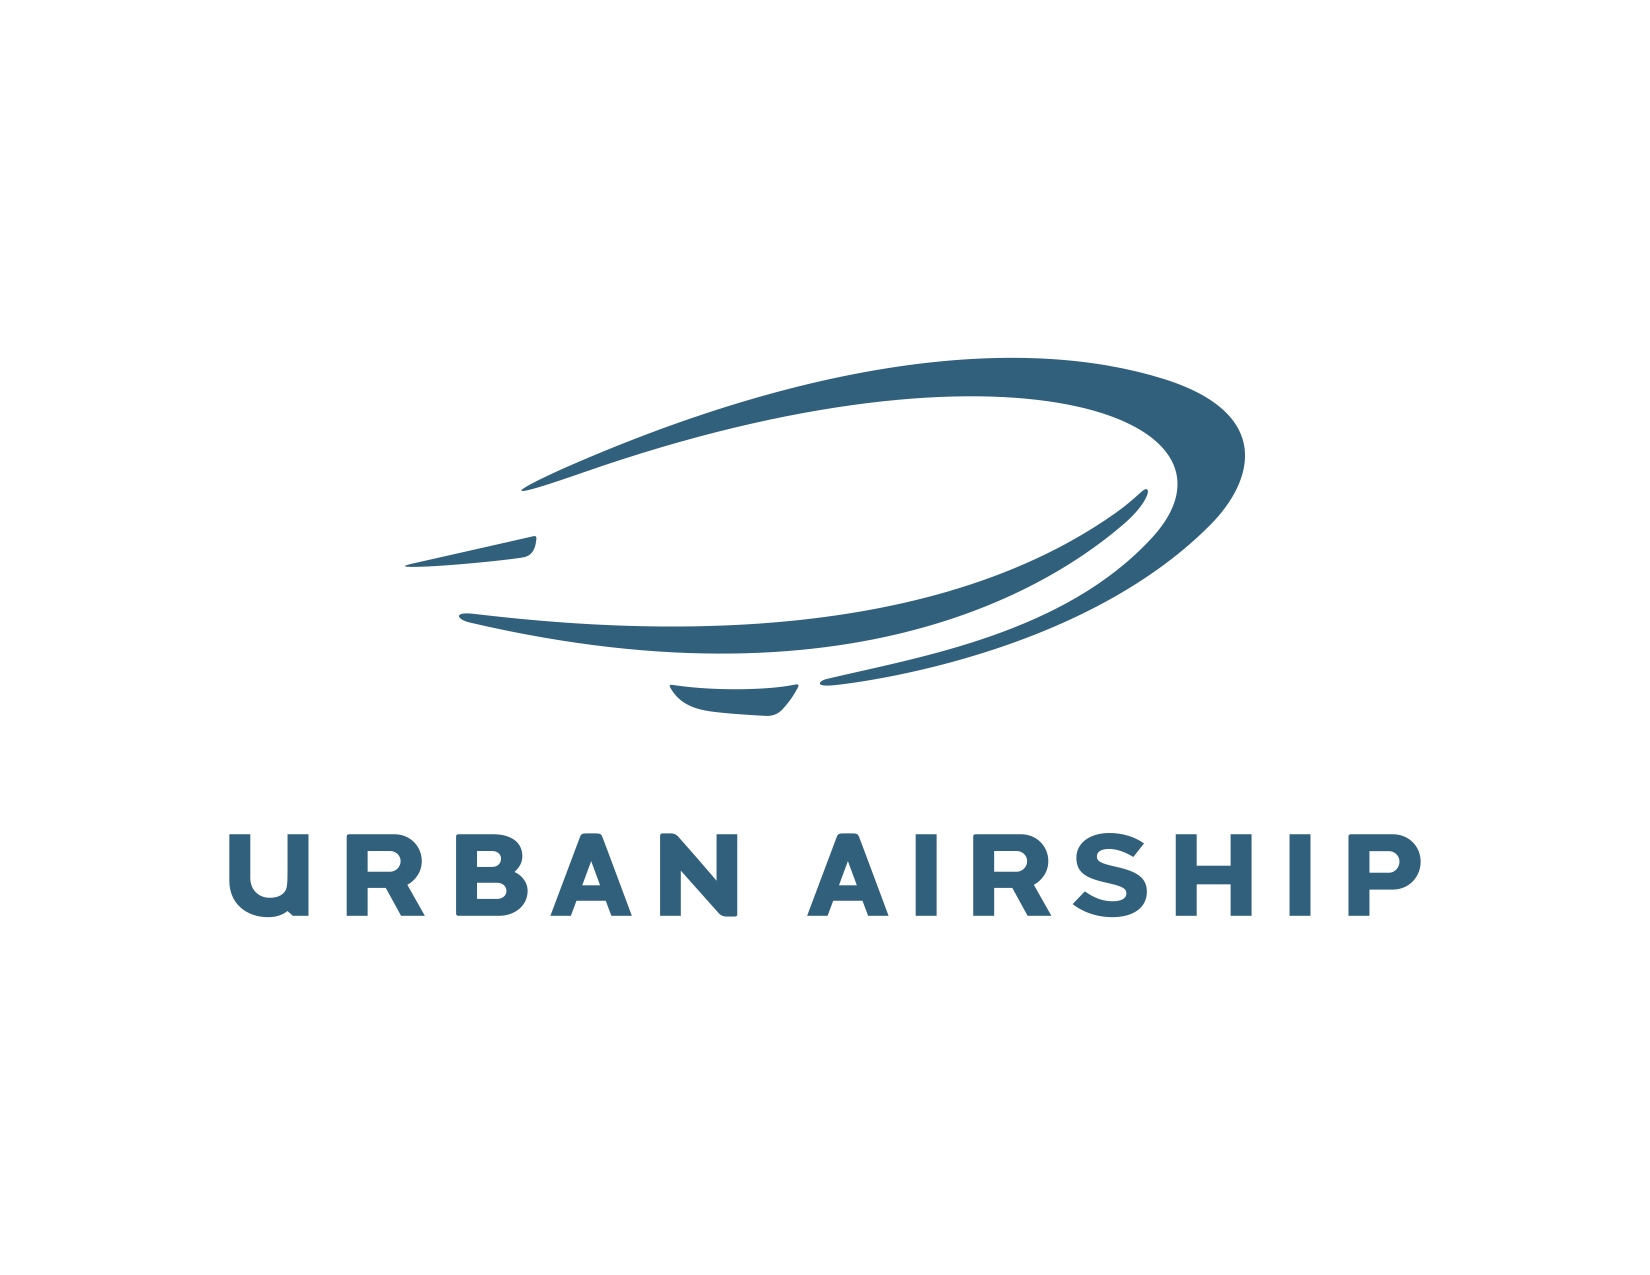 Urban Airship buys EU counterpart Accengage to extend reach further into Europe | DeviceDaily.com